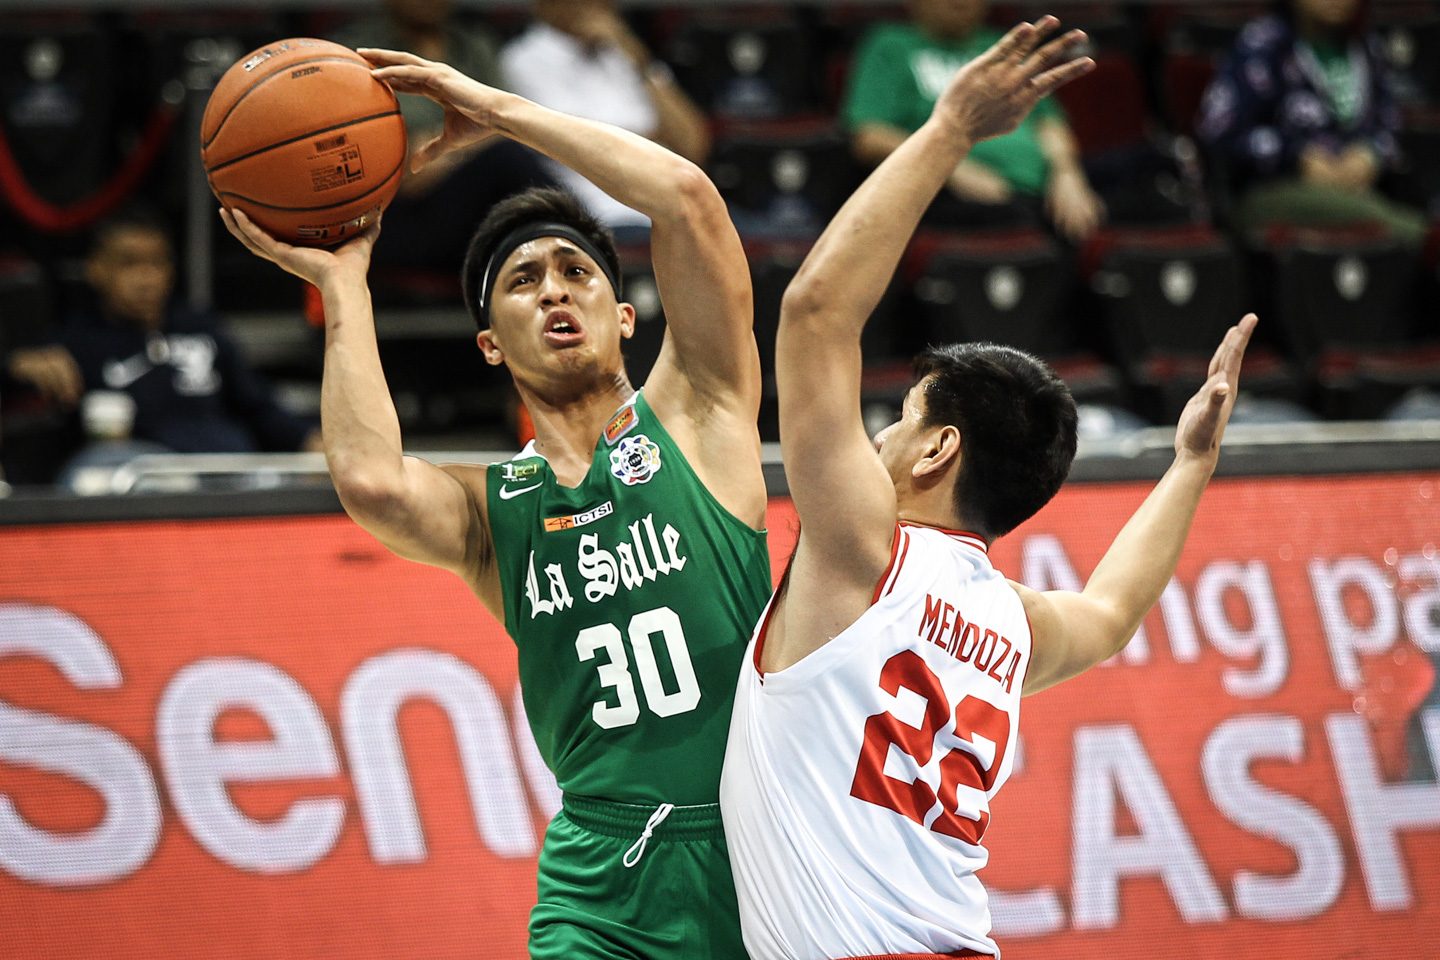 Caracut shrugs off doubters amid La Salle’s early struggles